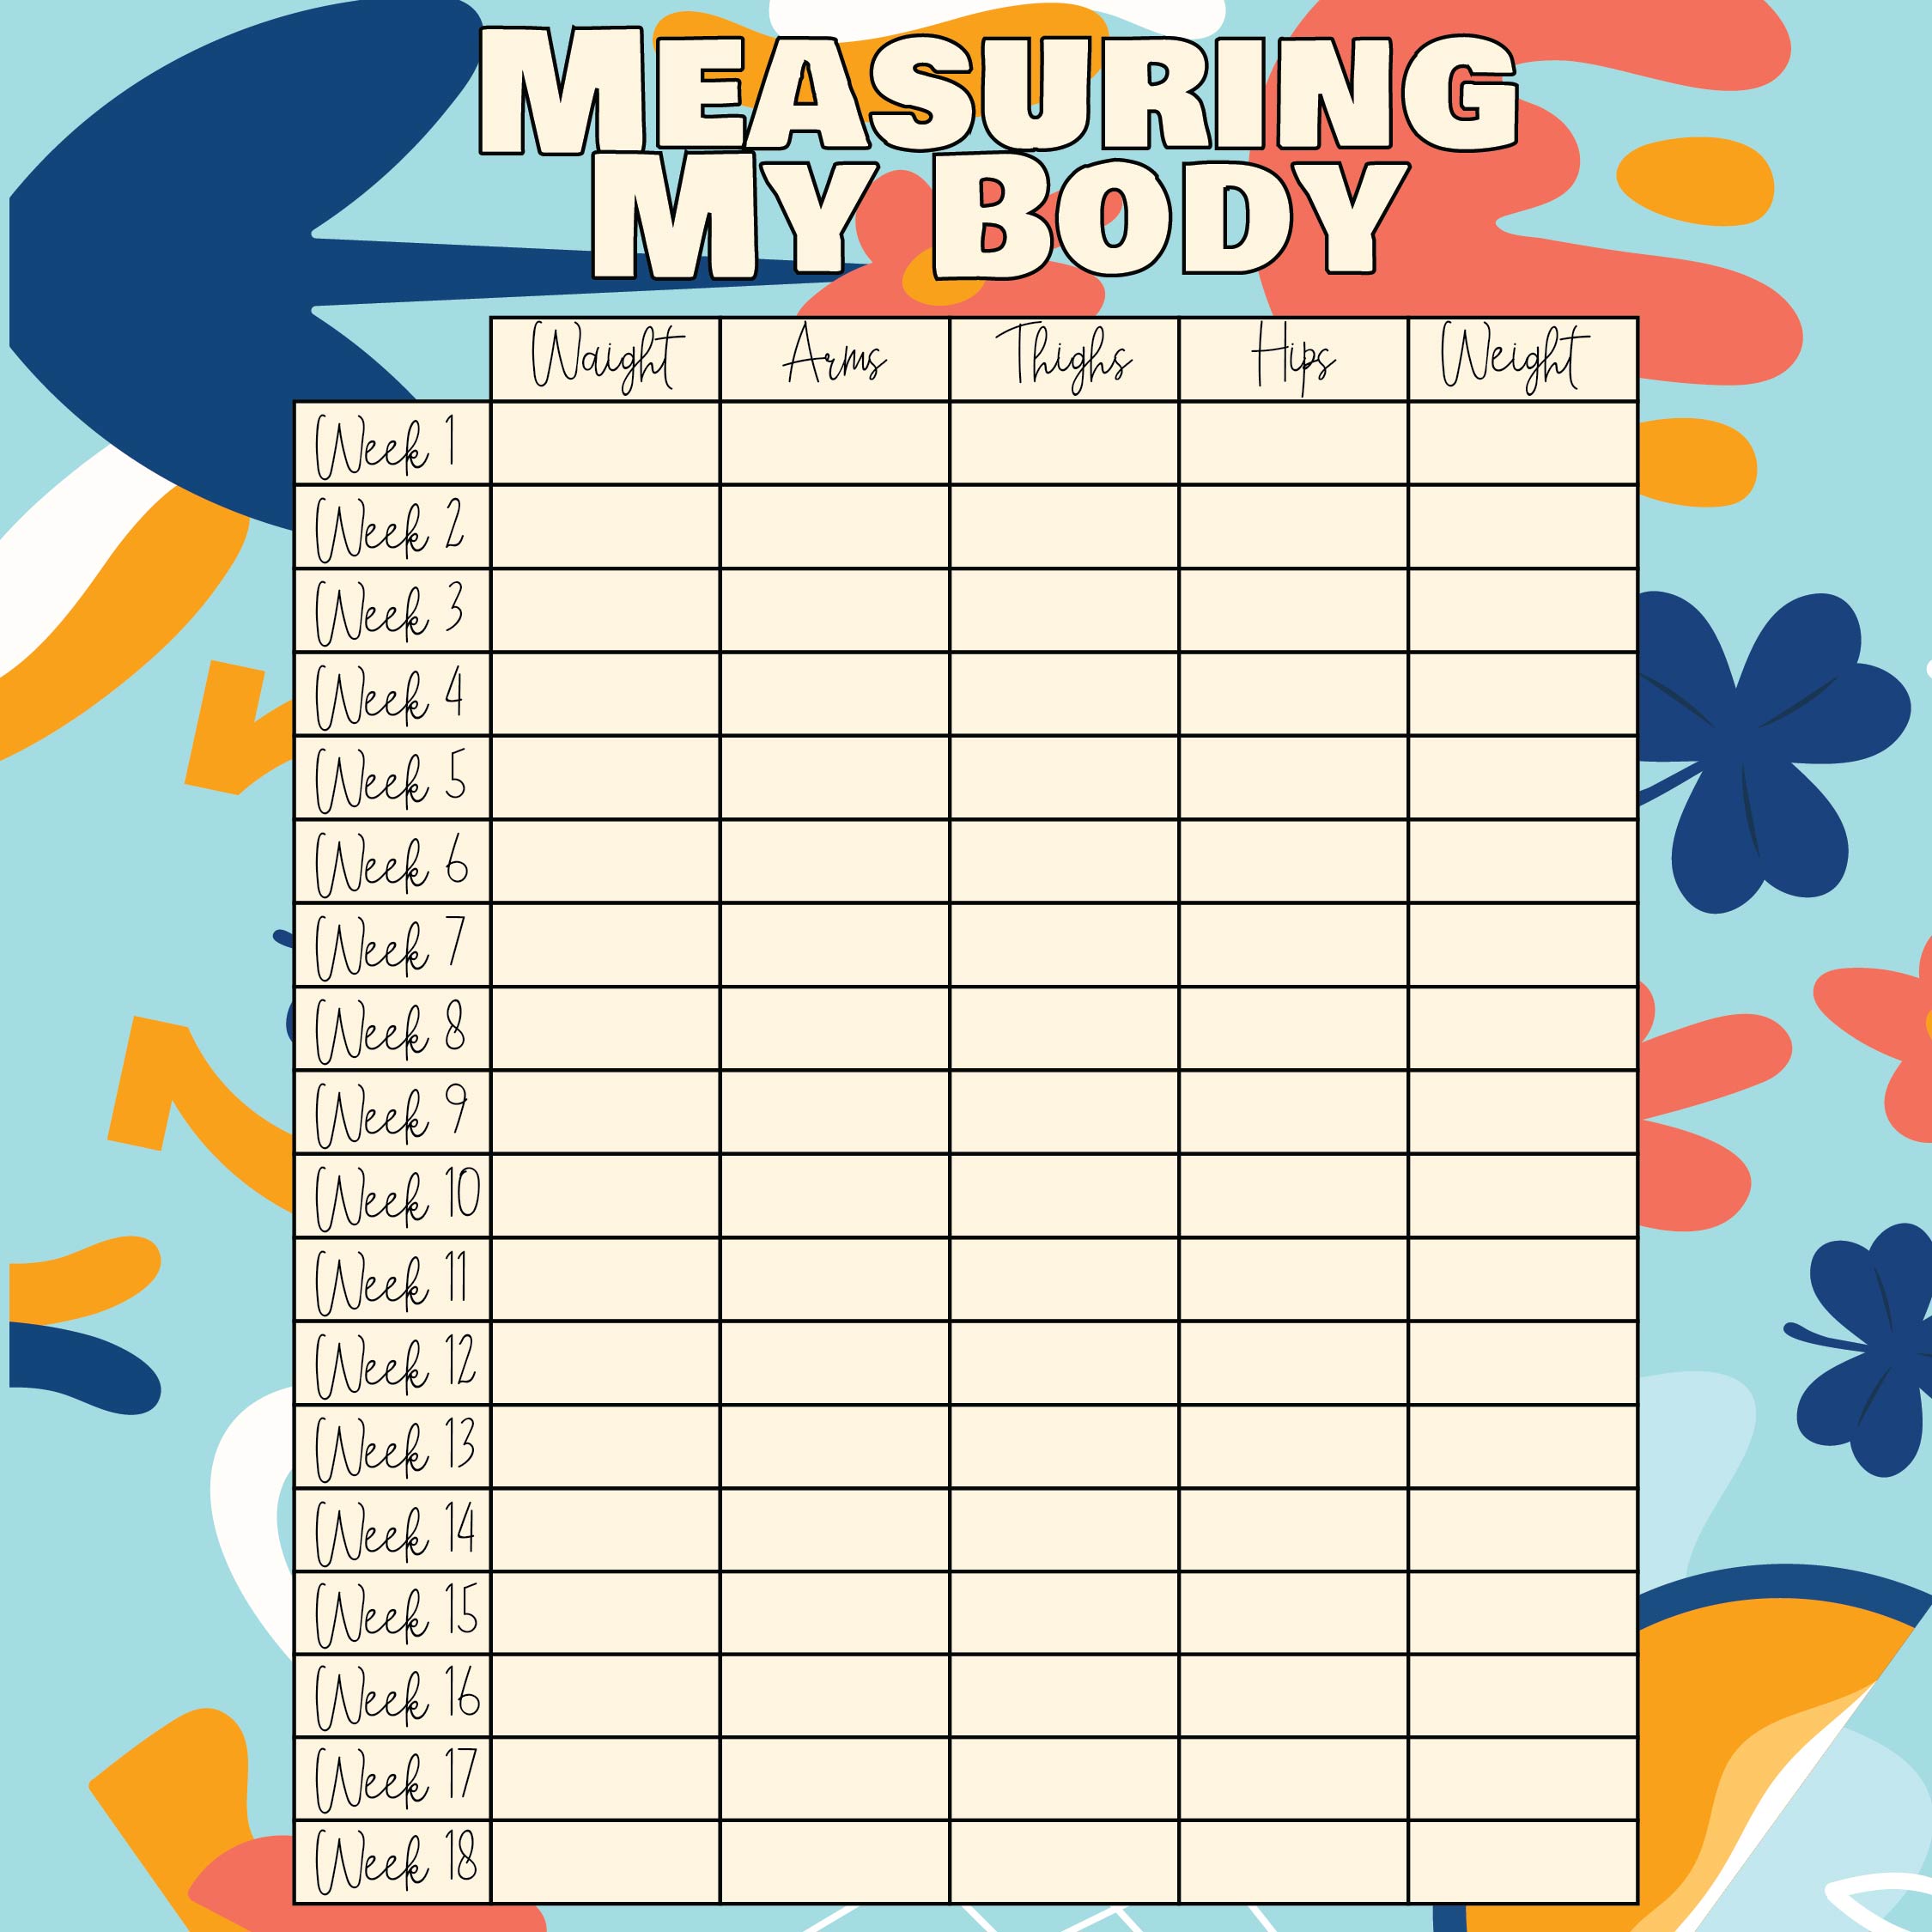 free-printable-body-measurement-chart-for-weight-loss